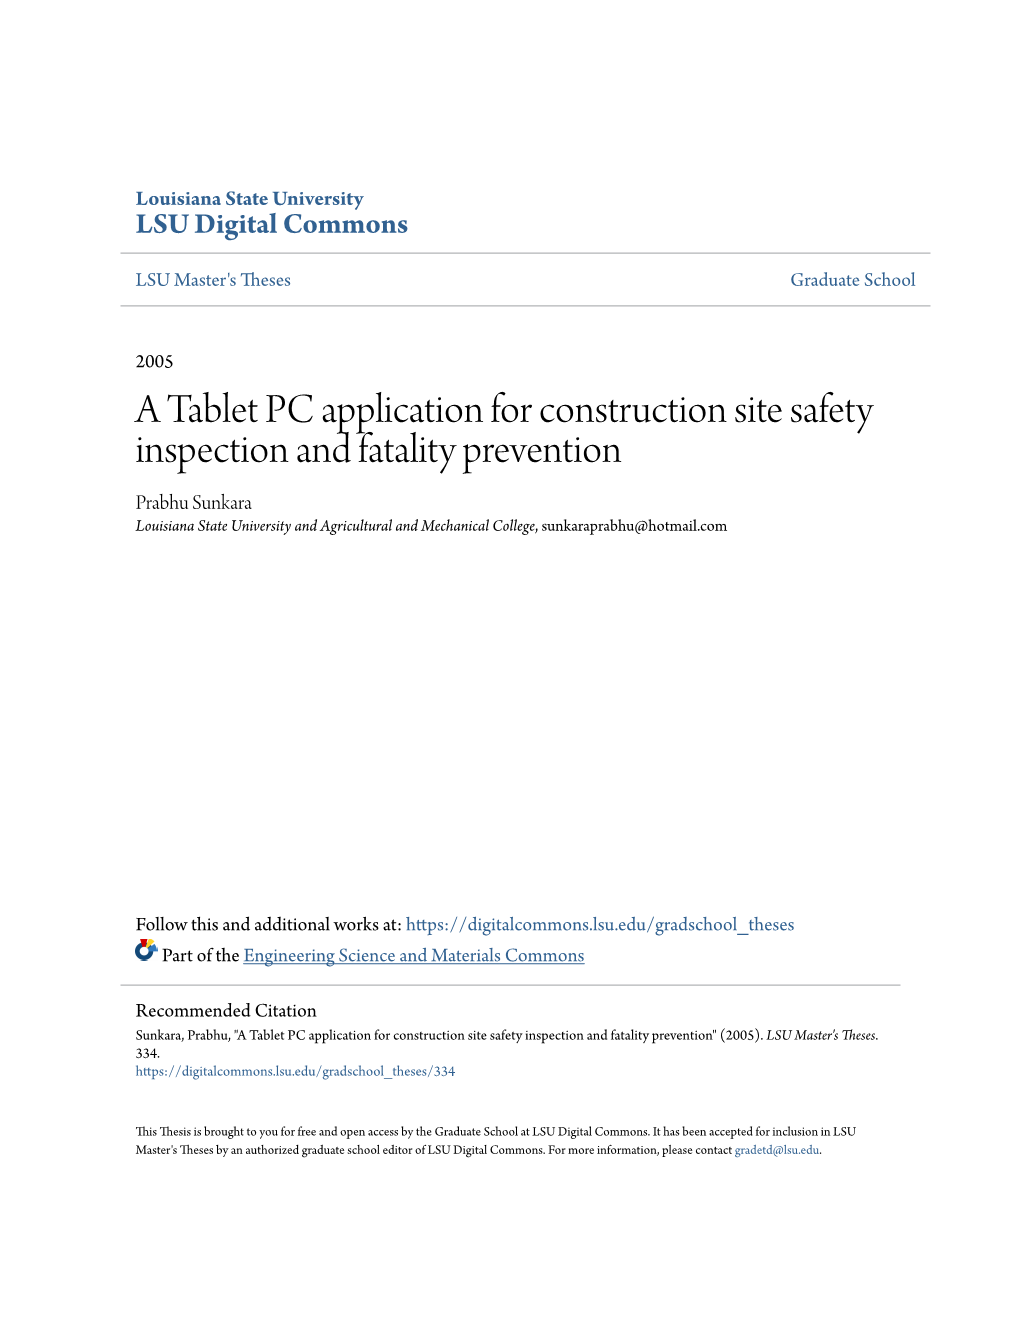 A Tablet PC Application for Construction Site Safety Inspection